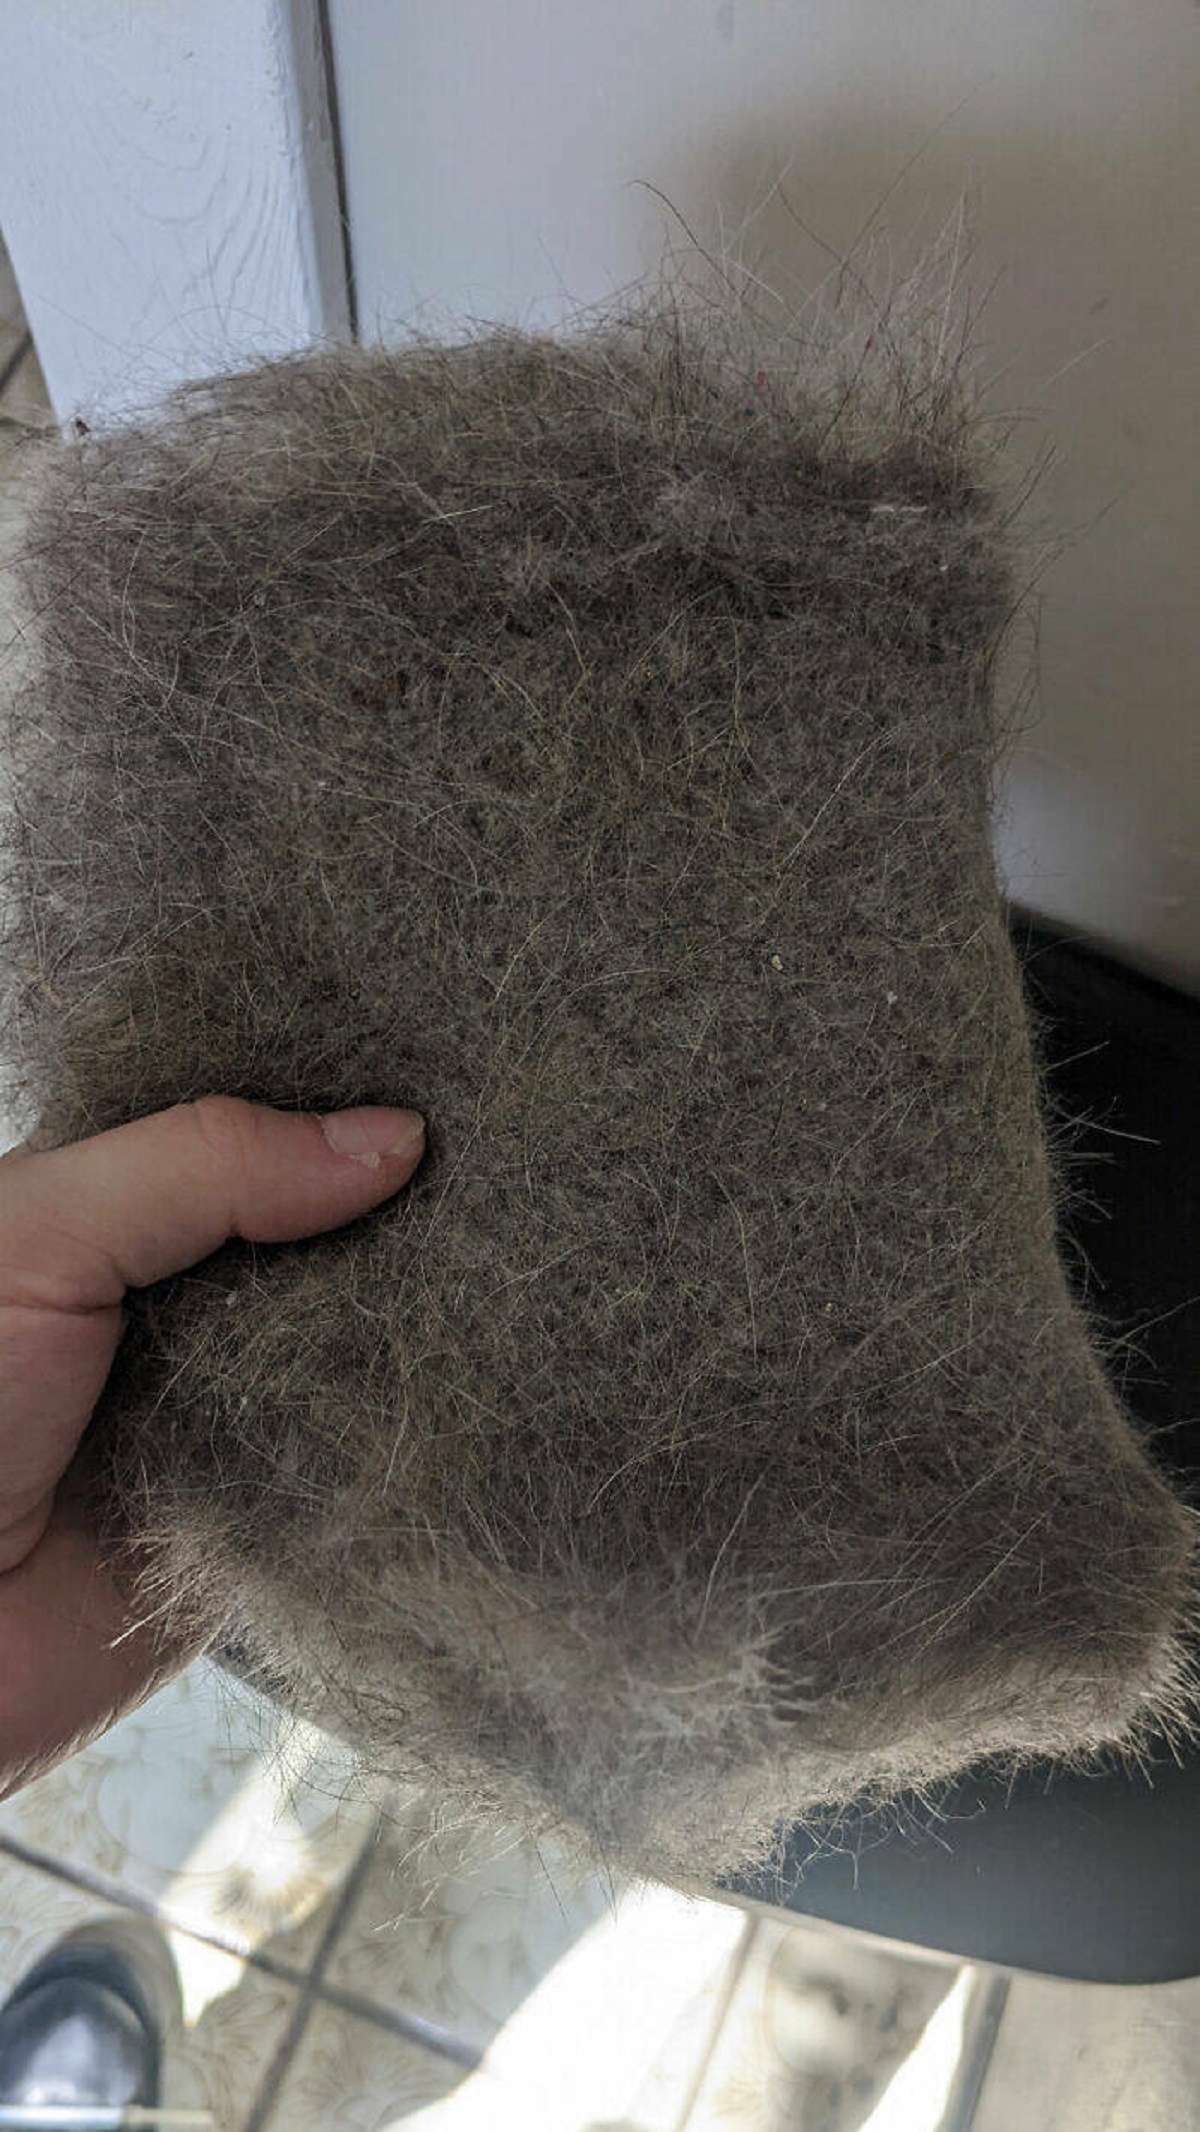 "My Coworker Drives Me Insane. My Coworker Doesn't Shut Doors, Refuses To Do Dishes, Doesn't Empty The Lint Trap, Etc. This Is What I Pulled Out Of It Today"